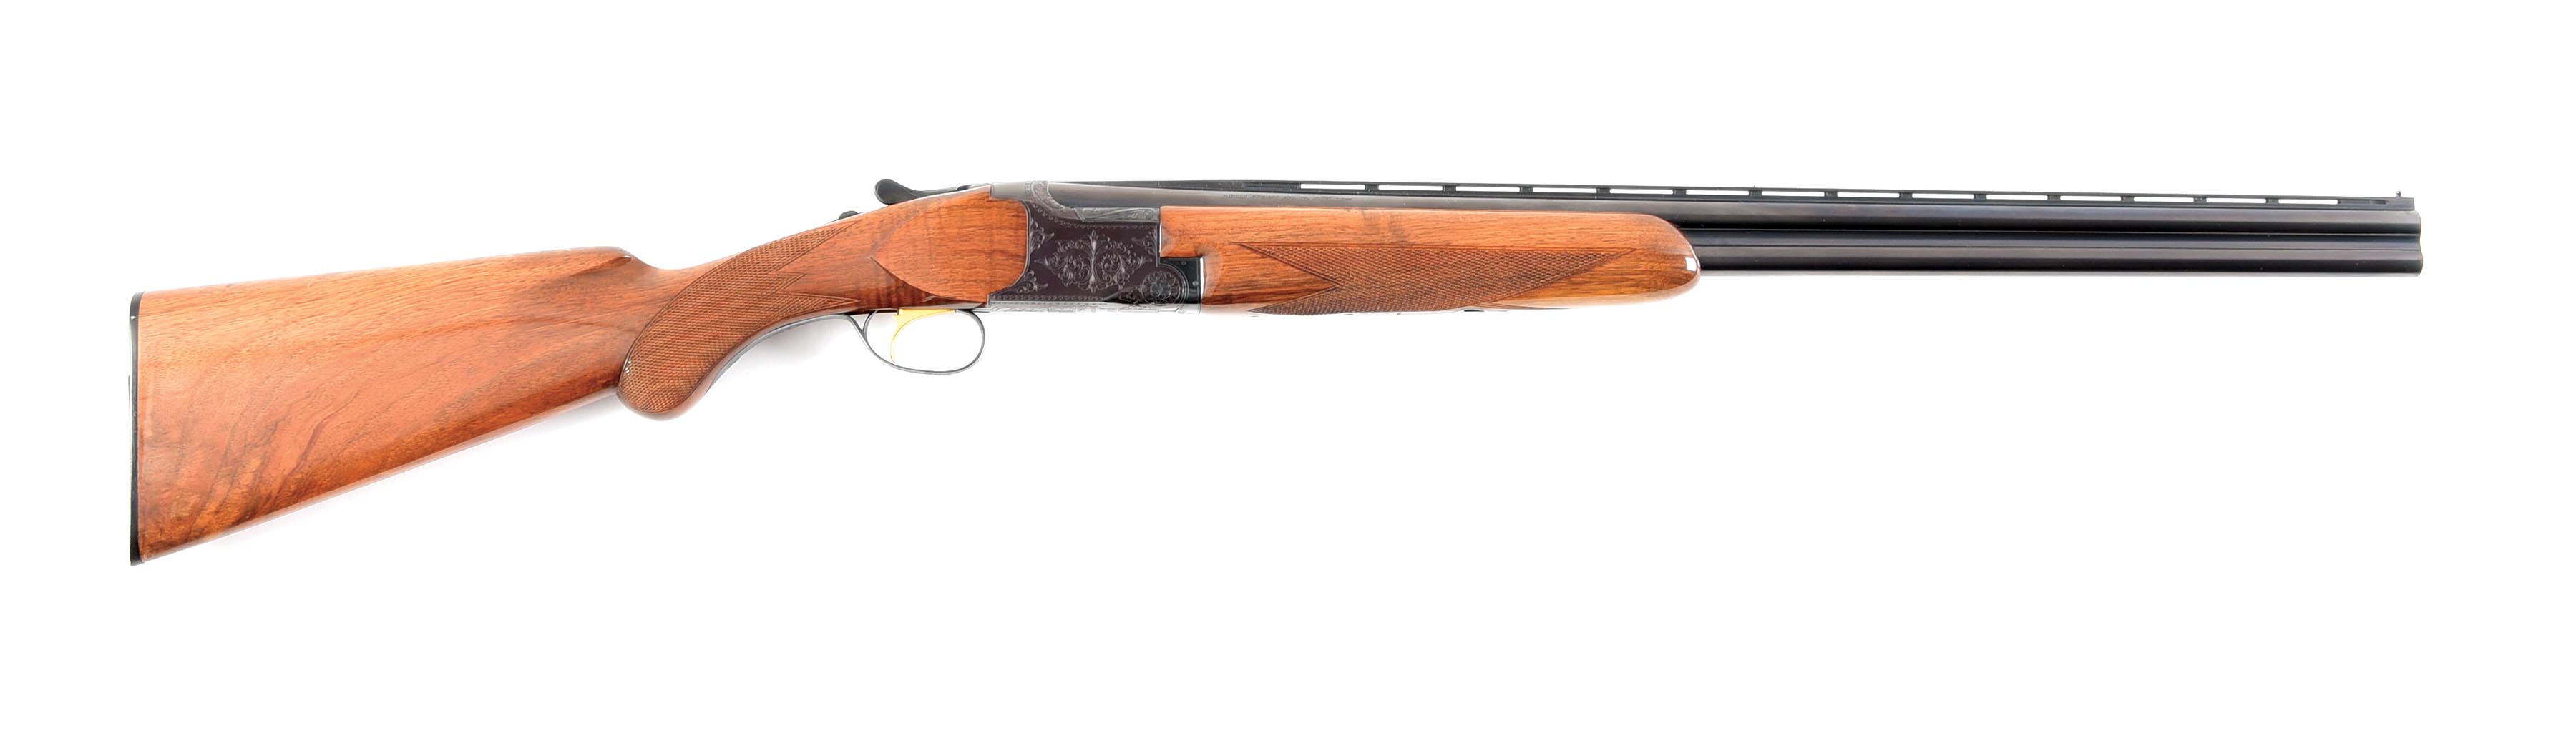 Charles Daly Miroku Model Over Under Shotgun Auctions Price Archive